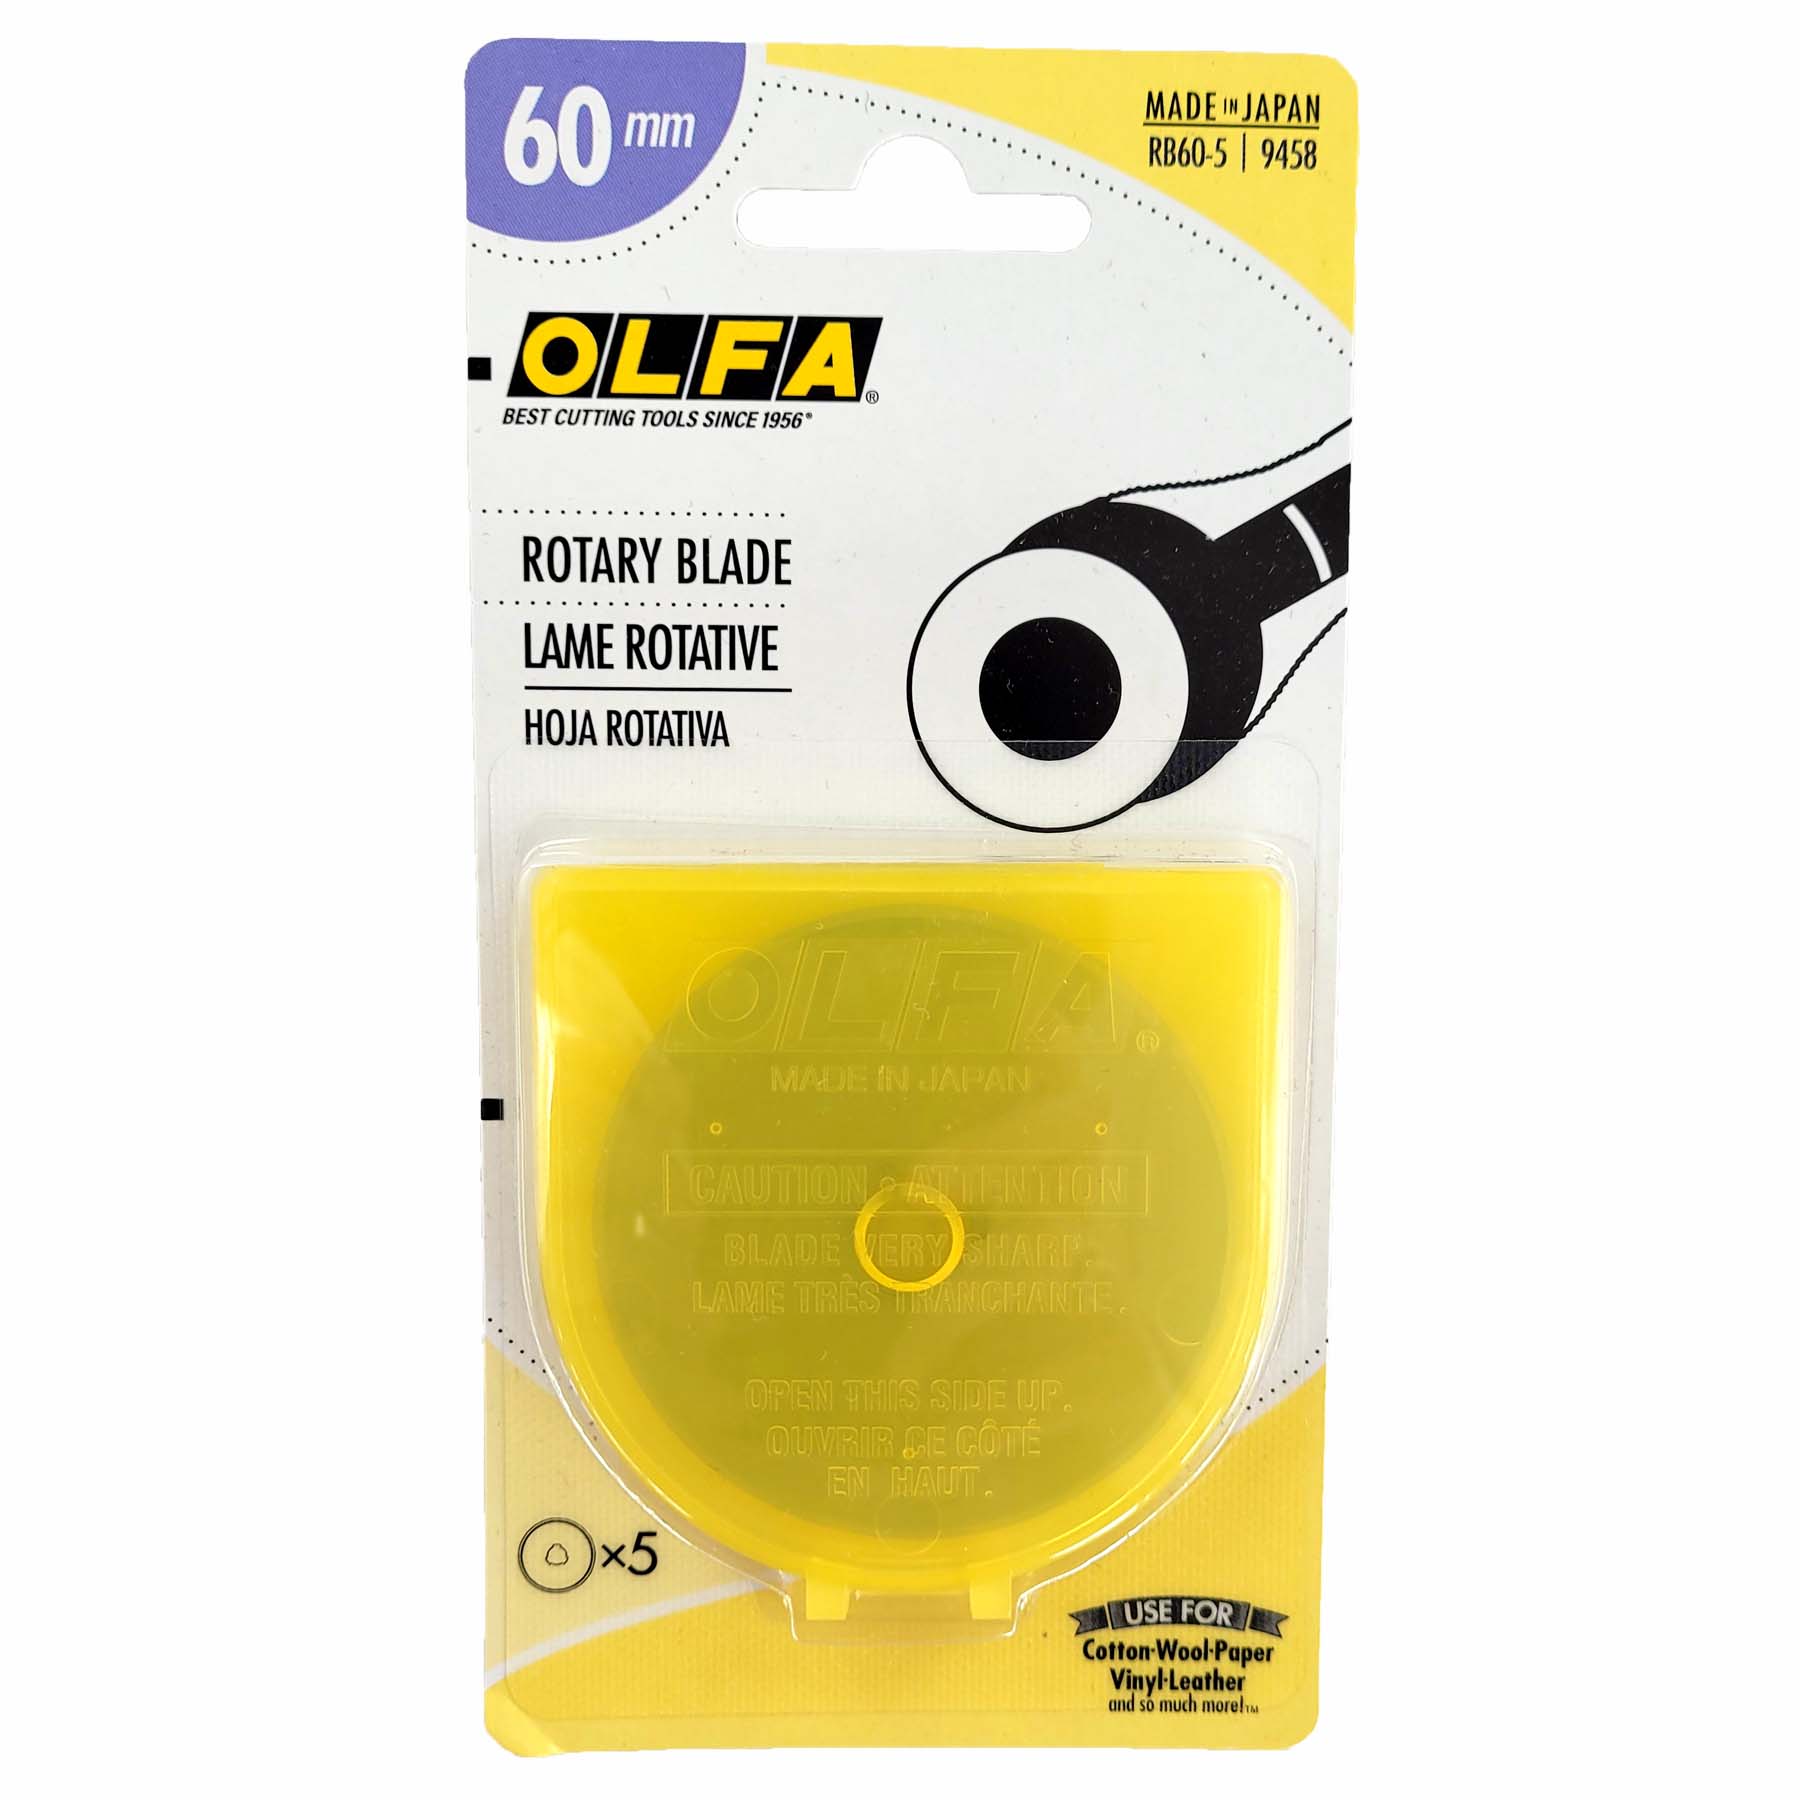 HEADLEY TOOLS 60mm Rotary Cutter Blades 10 Pack Fits Olfa, Fiskars,  Replacement Rotary Blade for Arts Crafts Quilting Scrapbooking Sewing,  Sharp and Durable 60mm 10pcs 